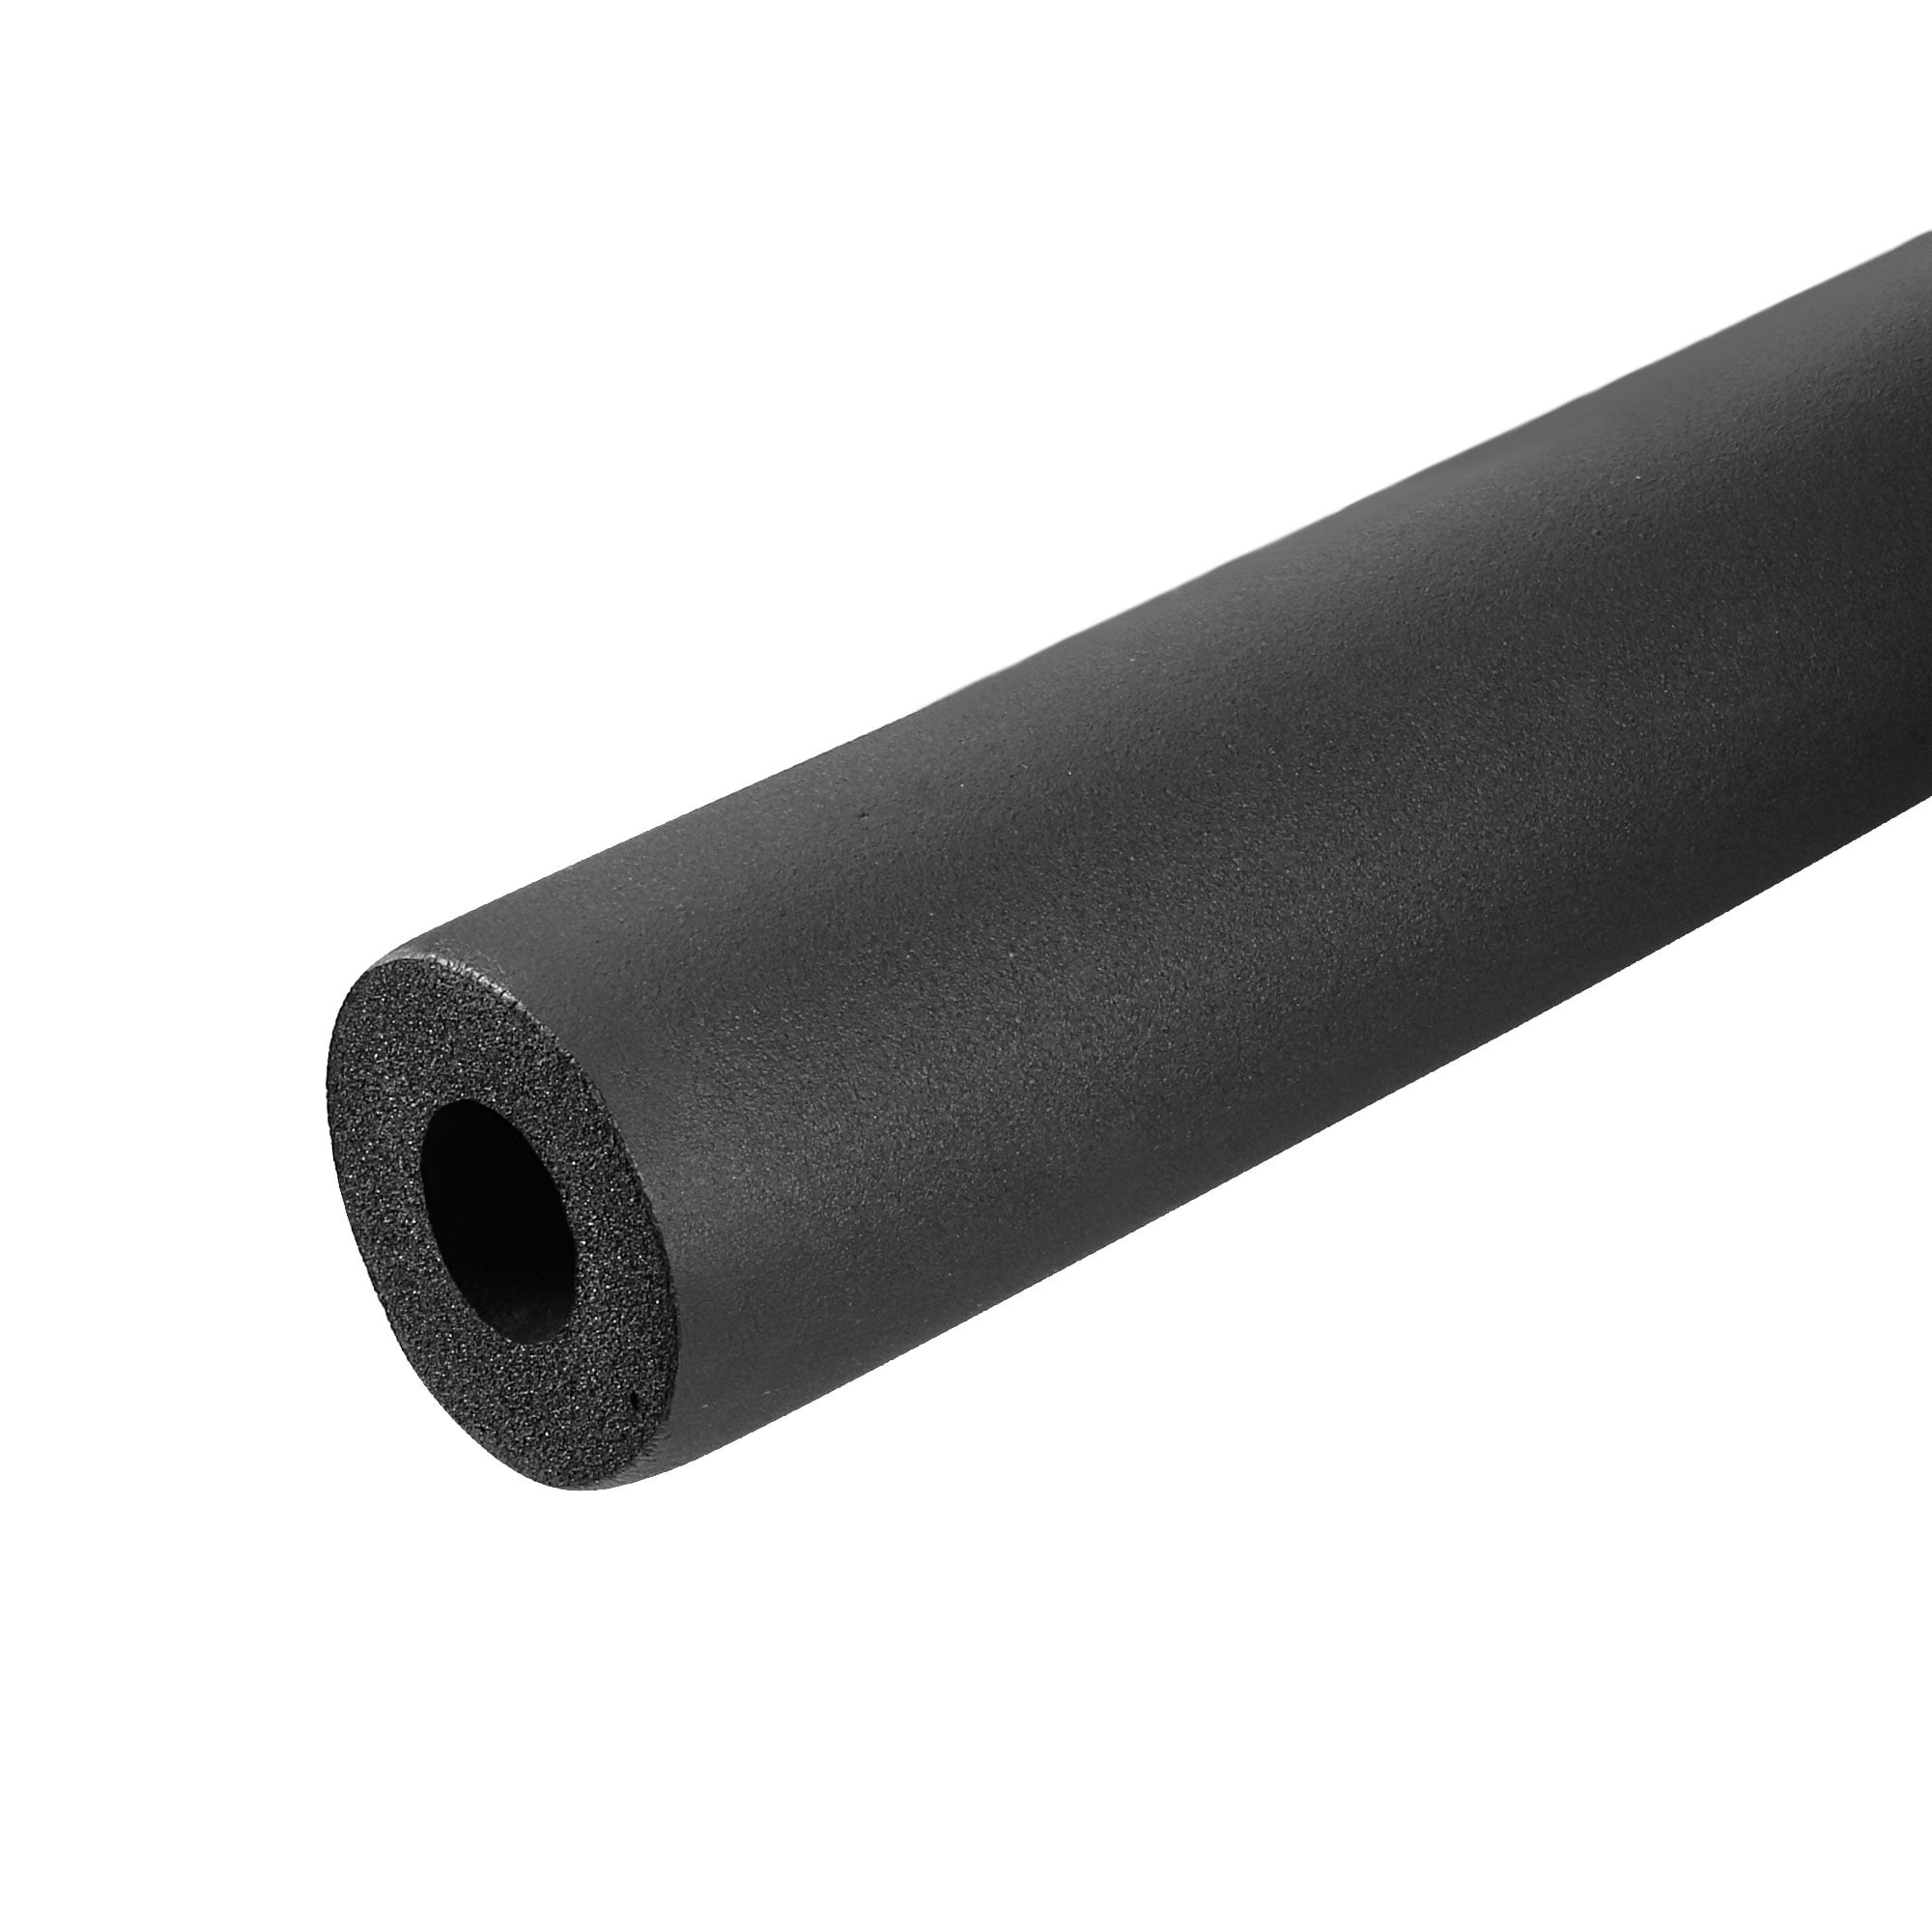 Uxcell 1/4 inch(6mm) ID 32mm OD 2m Long Cover Pipe Insulation Foam Tubing Black 2 Pack, Size: 6mmx32mmx2m